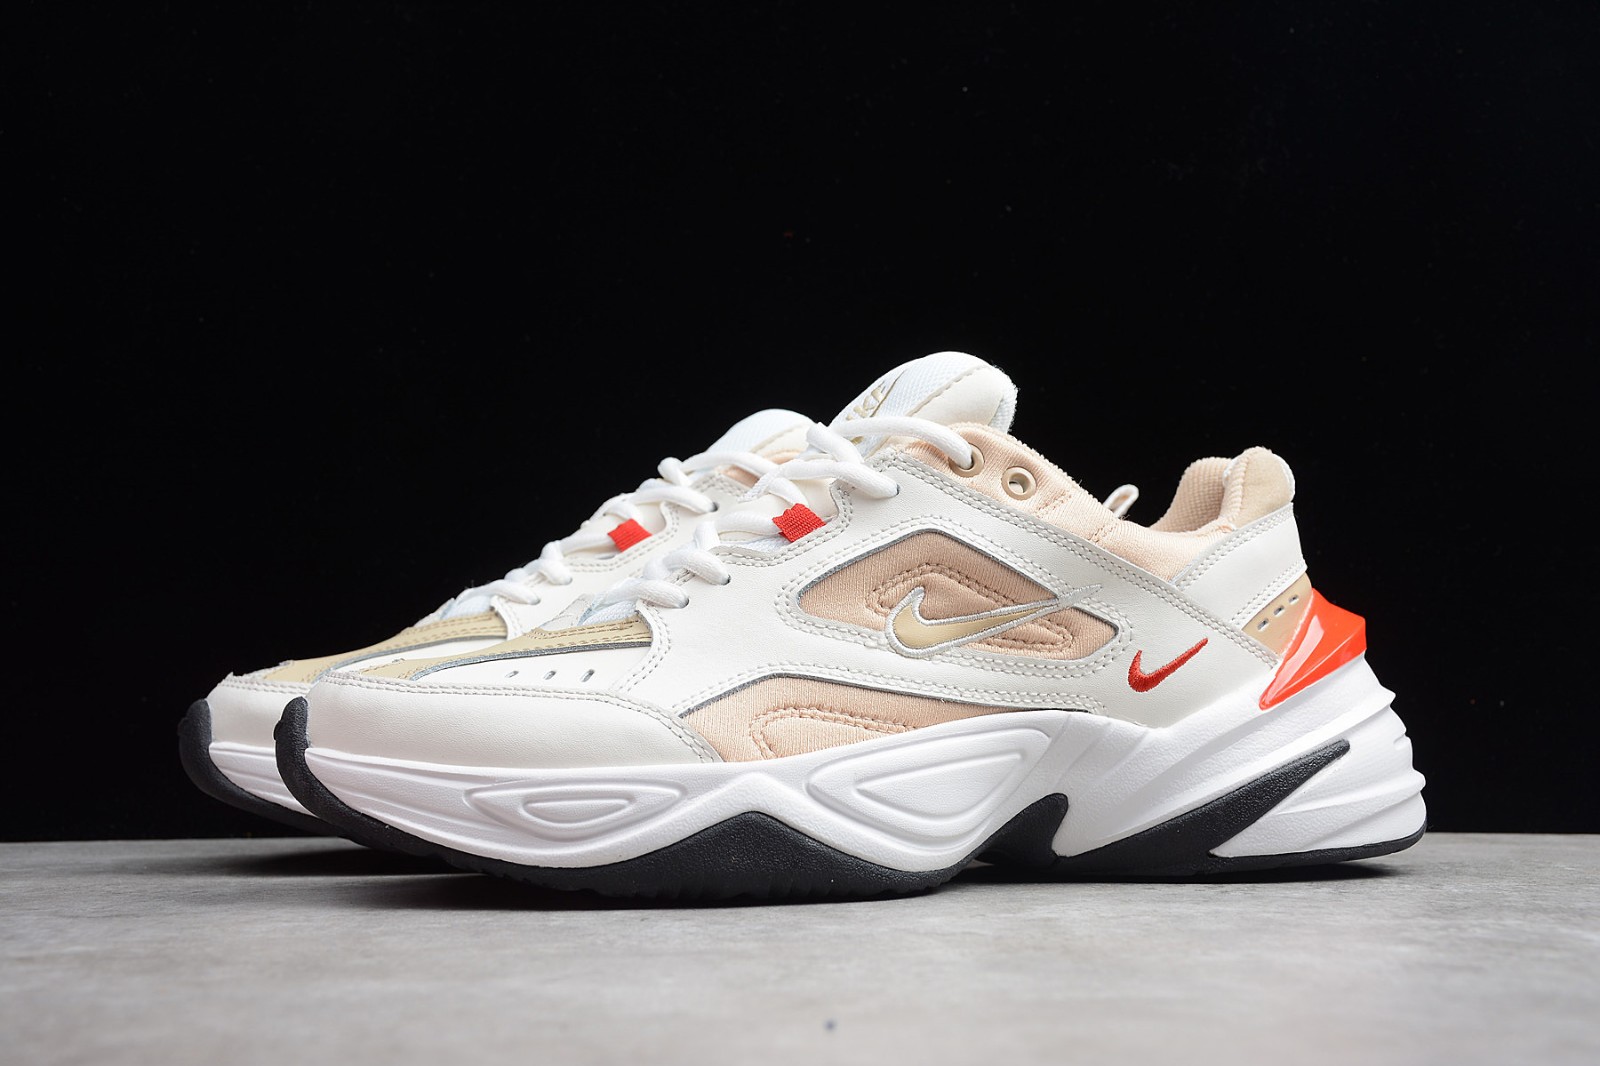 Supplement klauw Verduisteren 102 - Nike M2K Tekno Sail Habanero Red Daddy Shoes Chunky Sneakers AV4789 -  Vittoria Hera Performance Road Cycling Shoes - MultiscaleconsultingShops